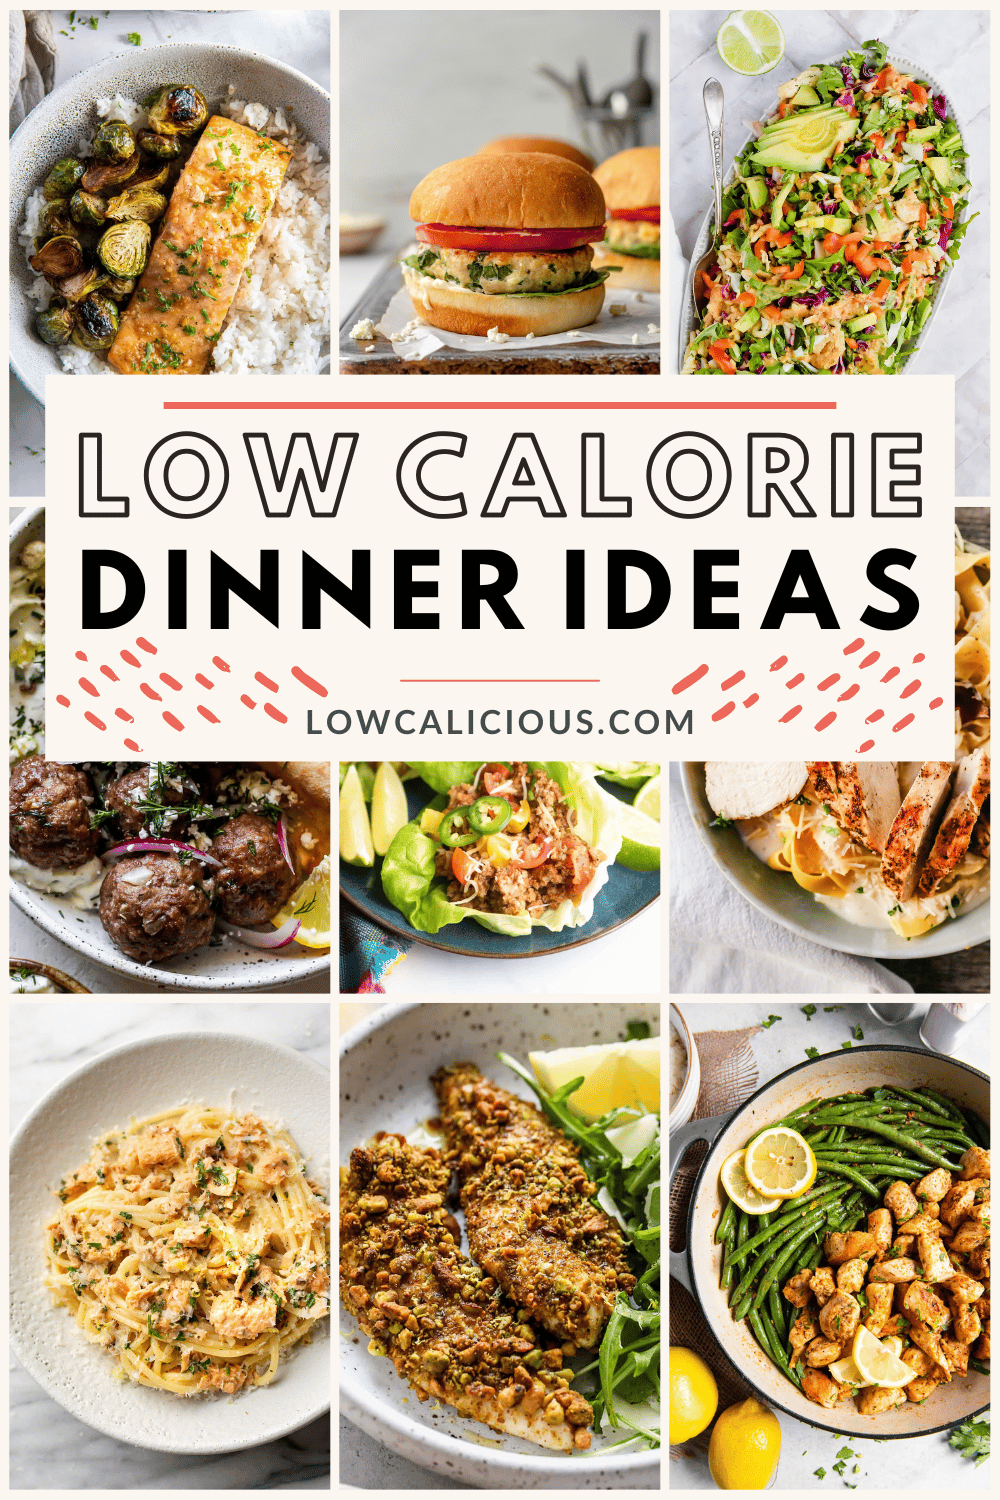 https://lowcalicious.com/wp-content/uploads/2022/10/Low-Calorie-Dinner-Ideas-pin-2.png